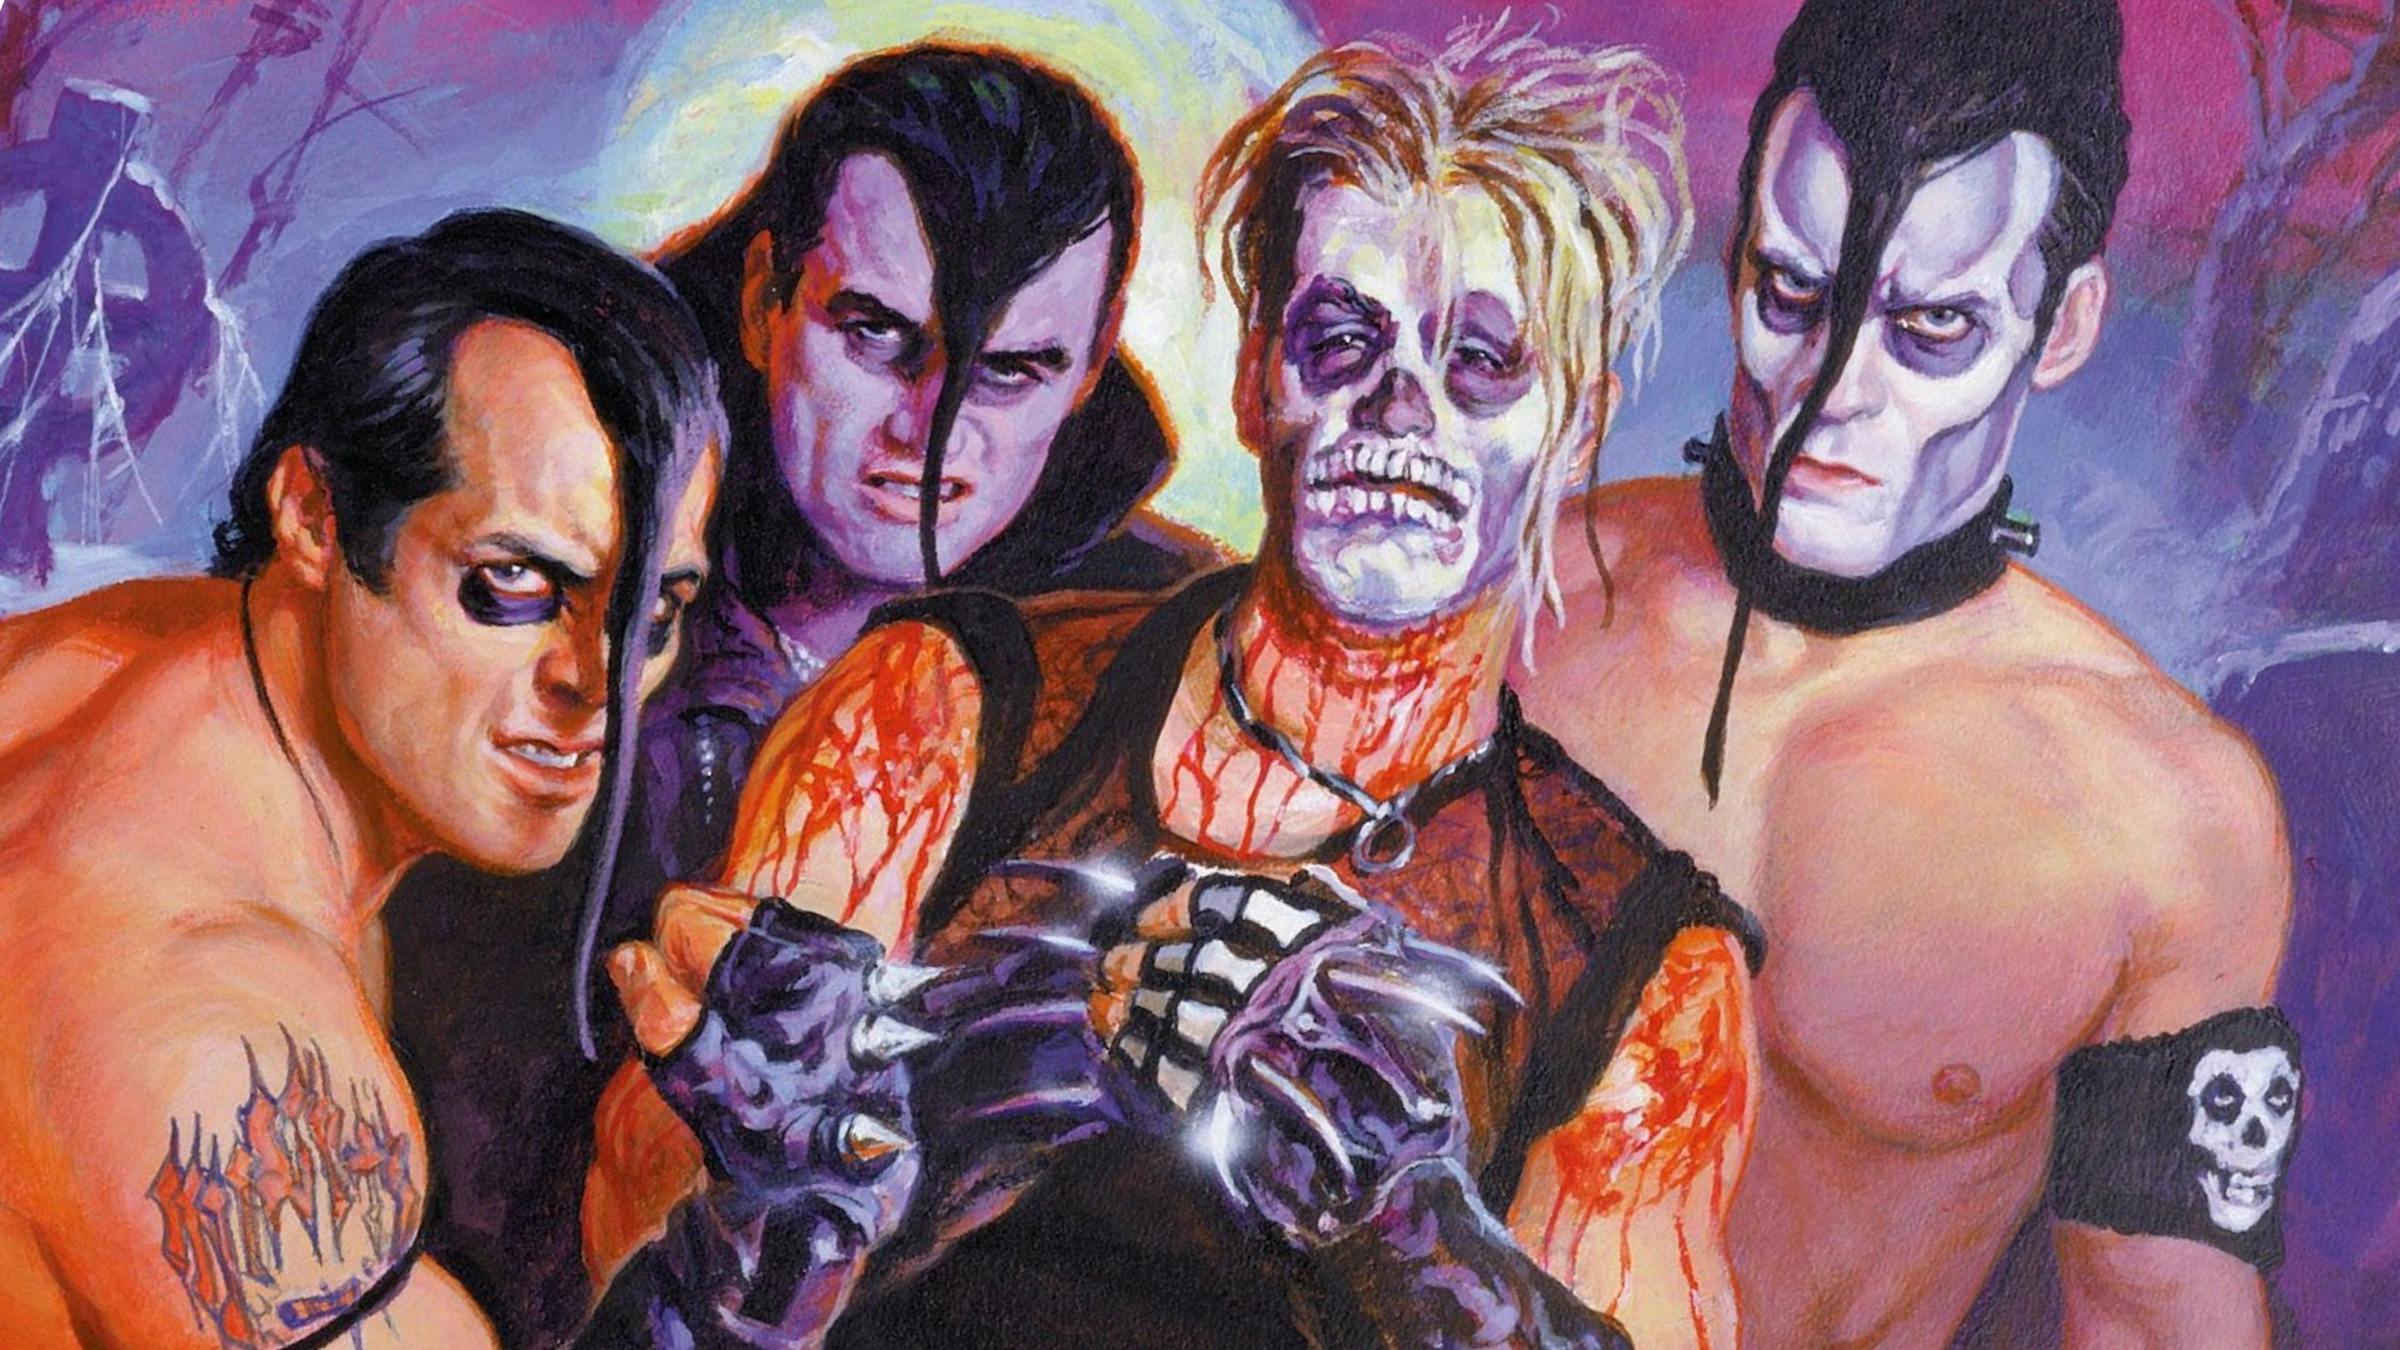 The Misfits Albums with Michale Graves Are Underrated Gems